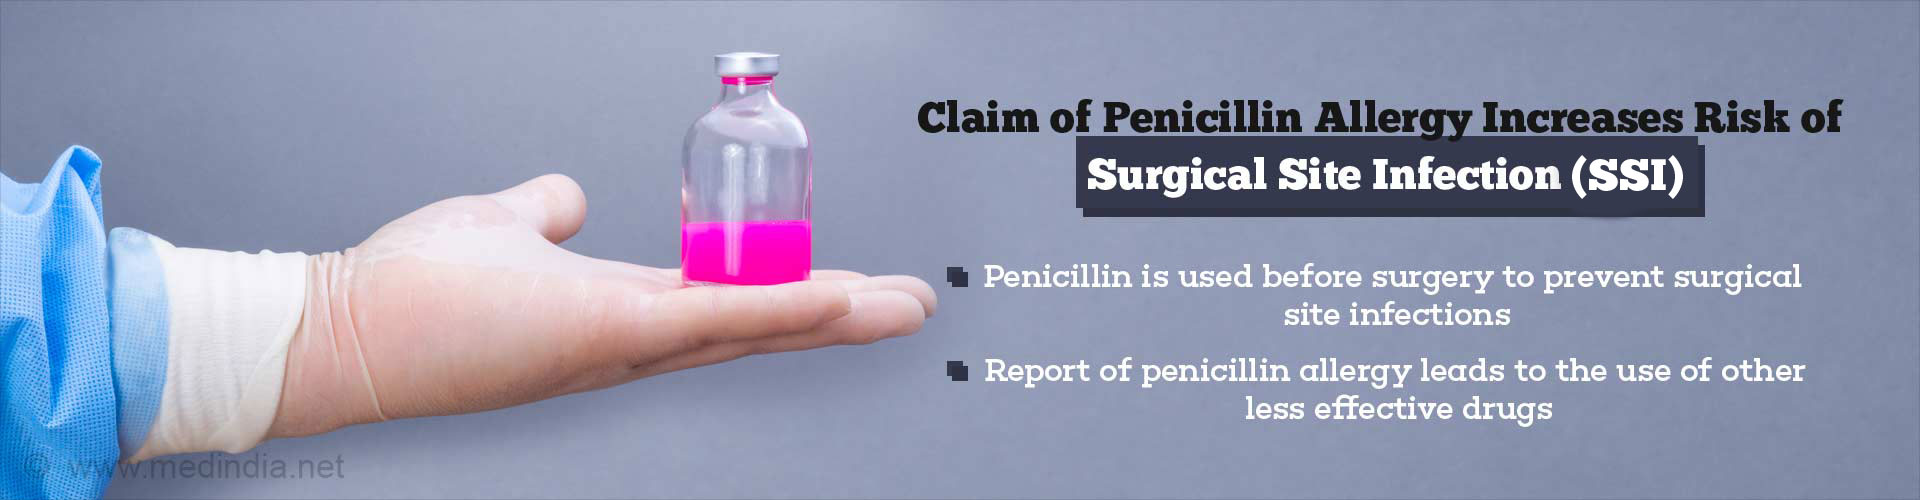 Claim of Penicillin Allergy Increases Risk of Surgical Site Infection (SSI)
- Penicillin is used before surgery to prevent surgical site infections
- Report of penicillin allergy leads to the use of other less effect drugs